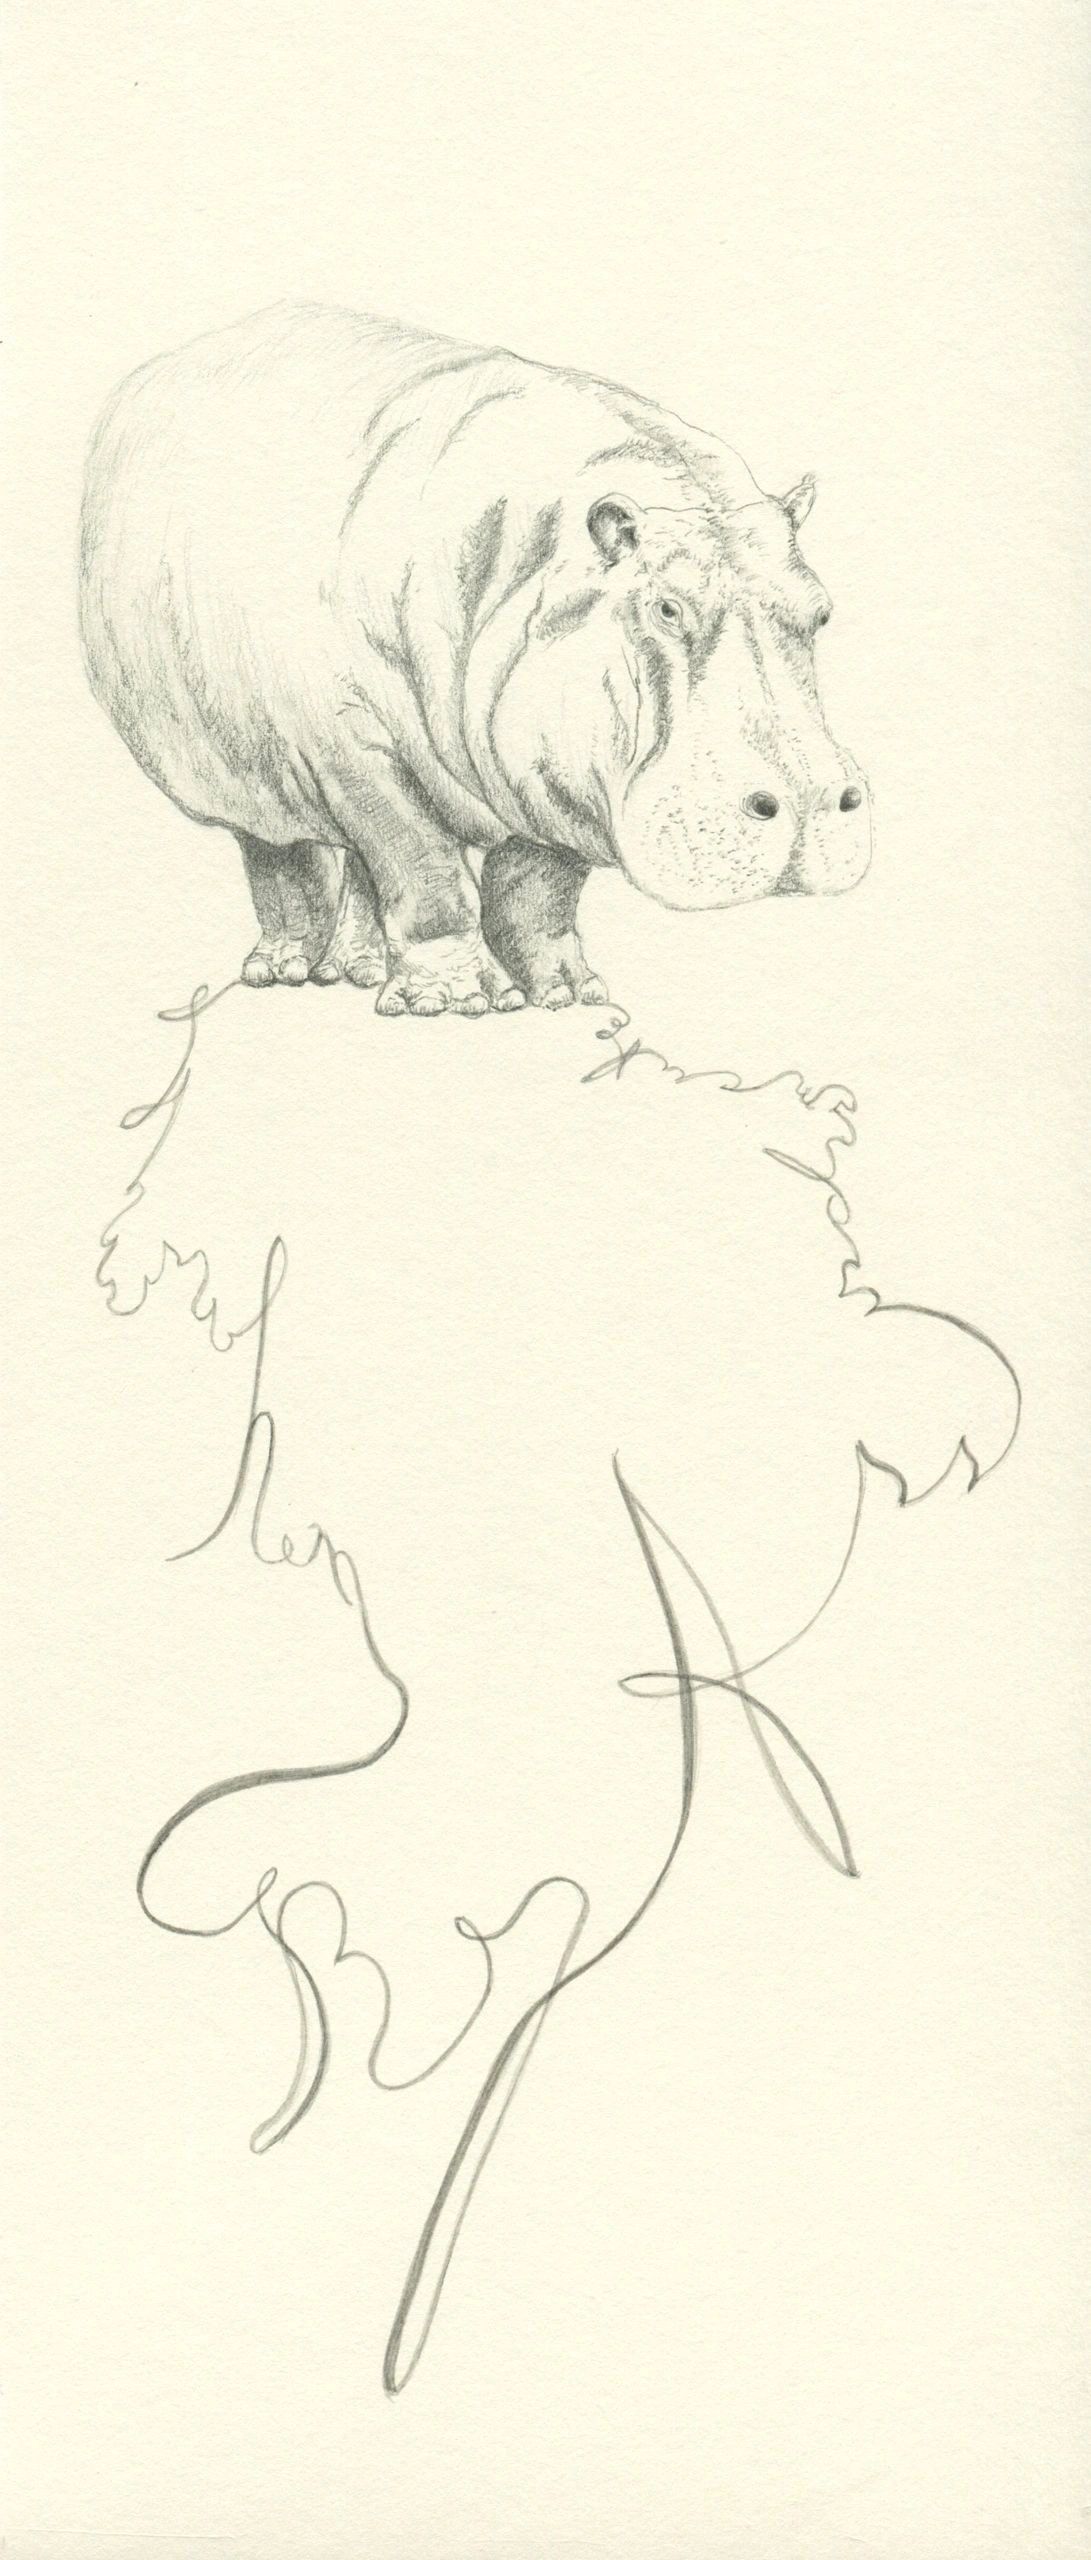 Ink drawing Hippopotamus graphite, text art on archival paper